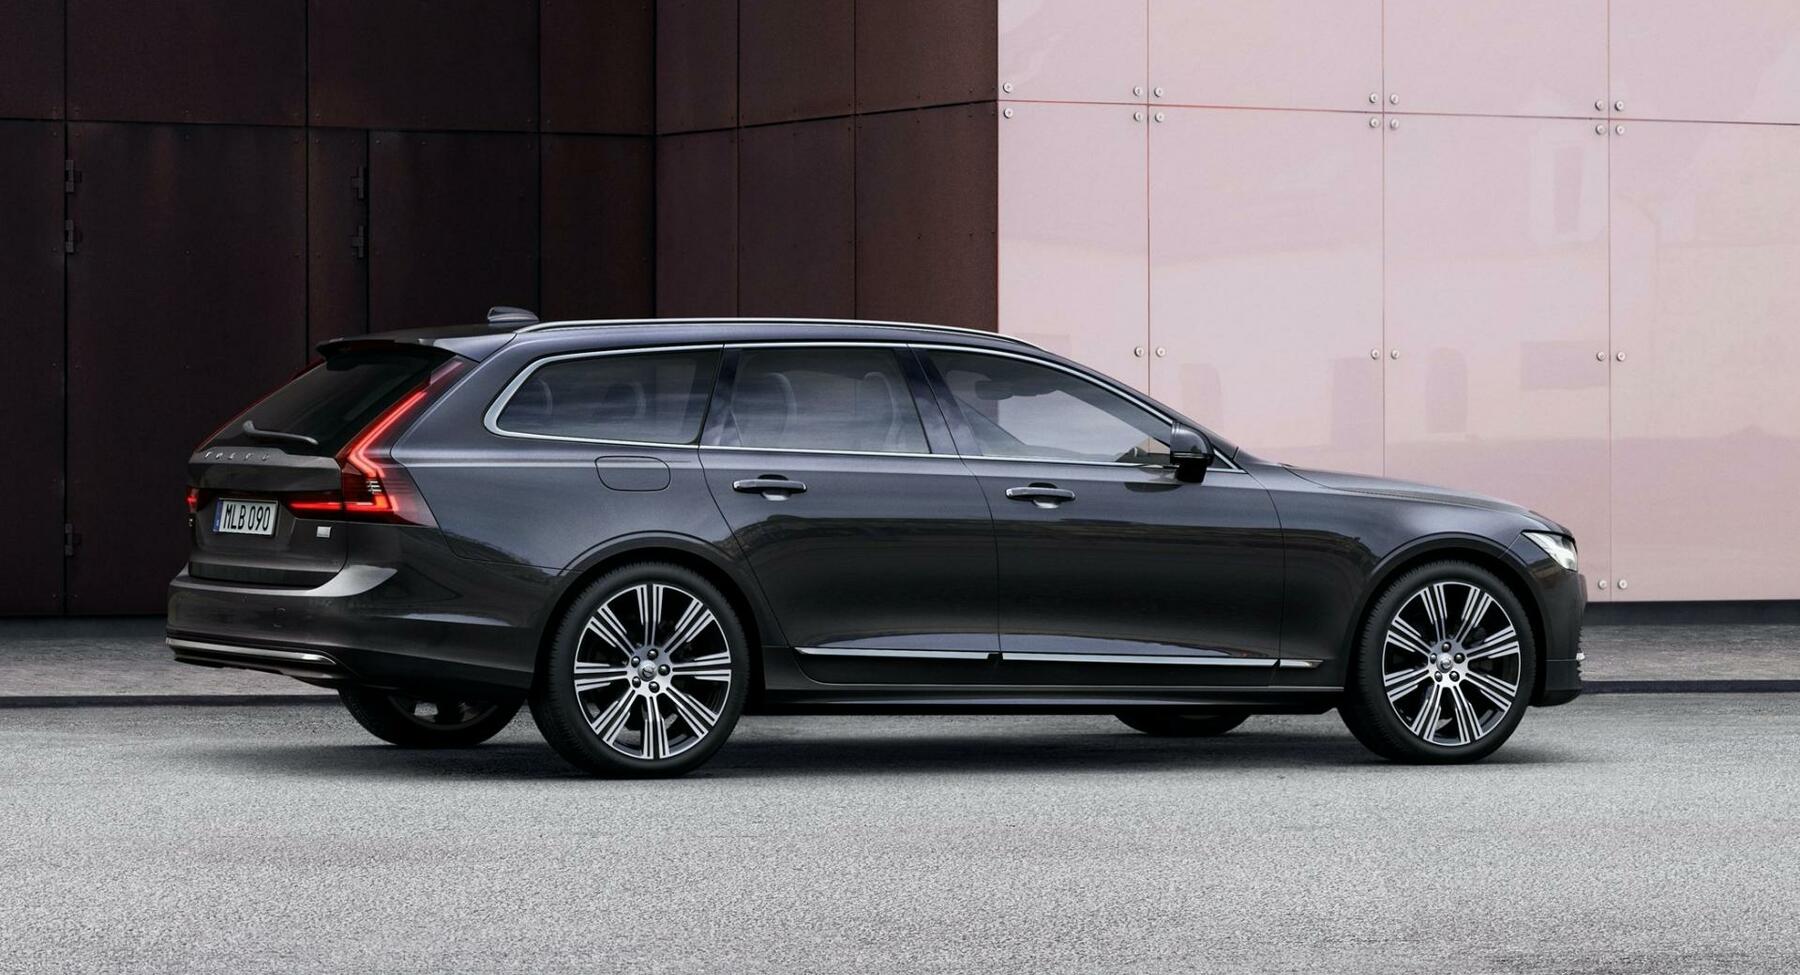 Volvo V90 Cross Country 2.0 D5 (235 Hp) AWD Automatic 2018, 2019, 2020